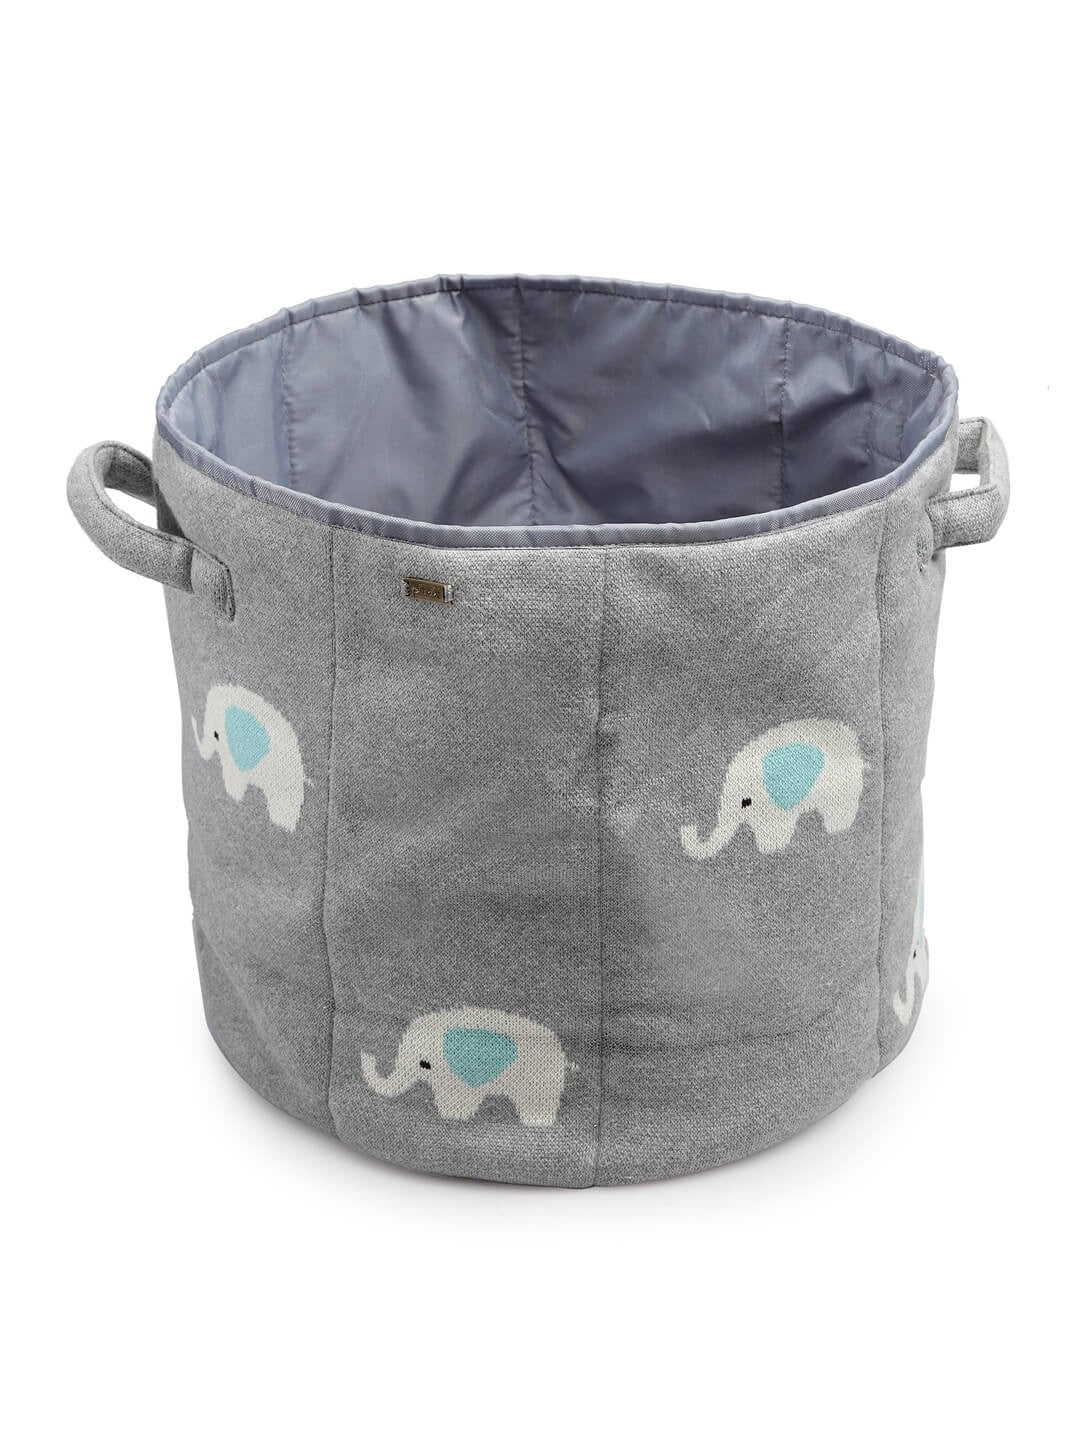 Baby Elephant Cotton Knitted Kids Basket